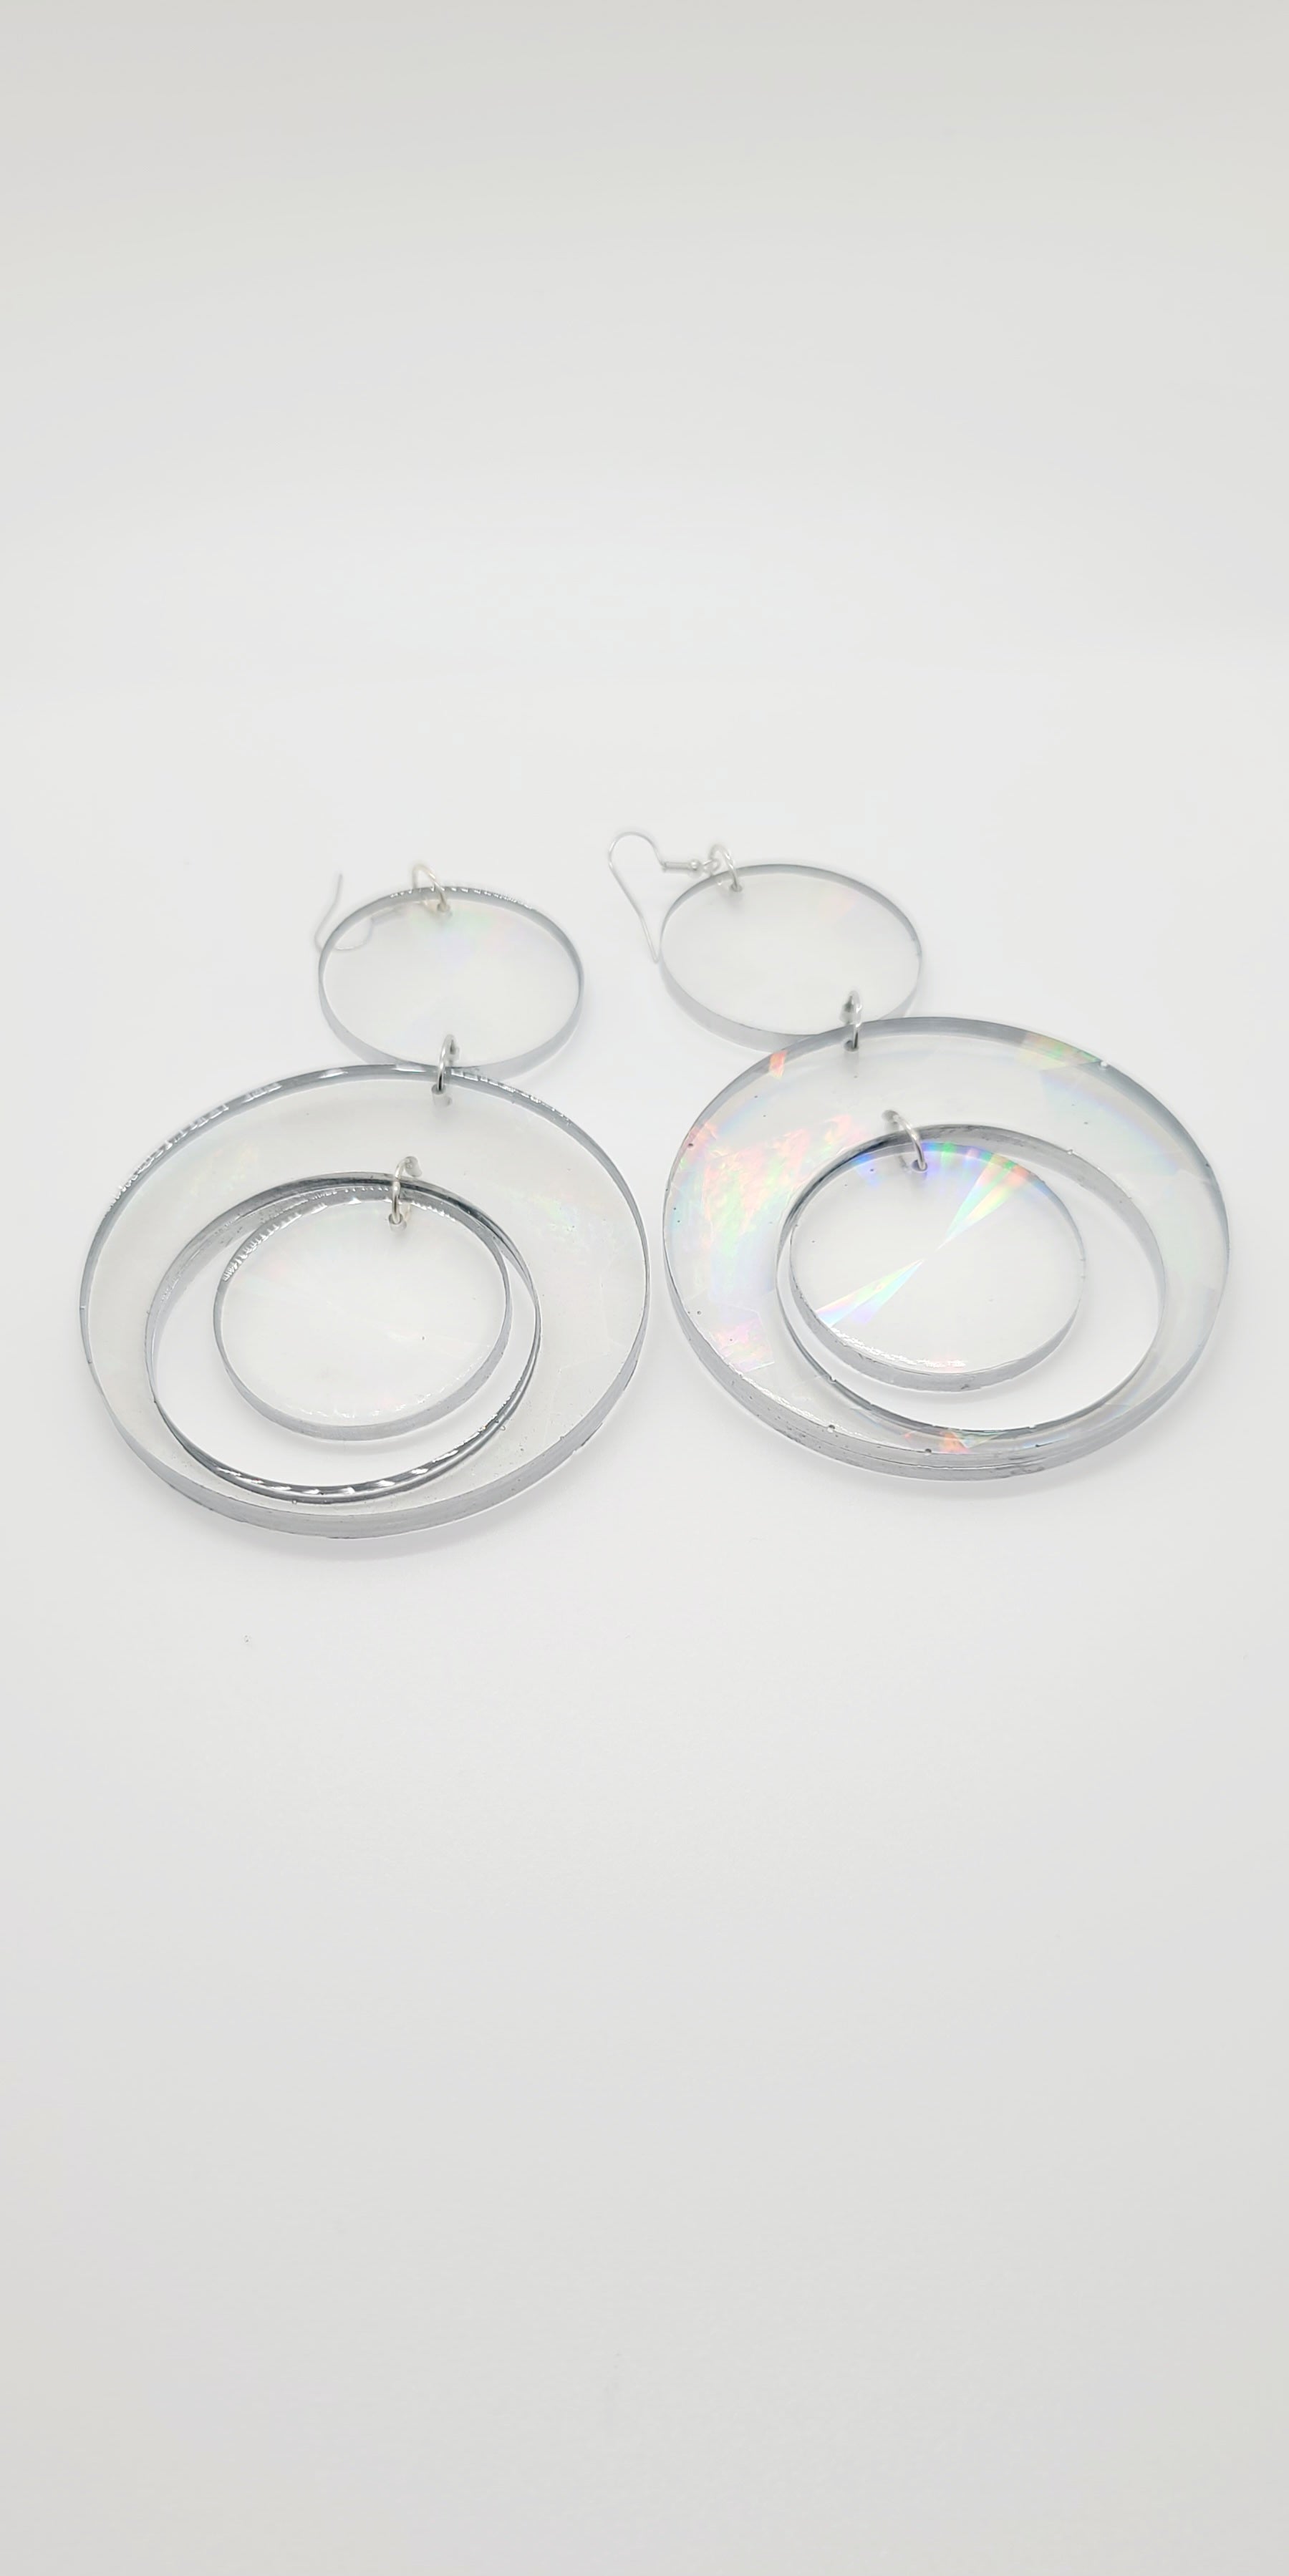 Length: 5.5 inches | Weight: 1.8 ounces  Distinctly You! These earrings are made with clear resin hologram hoops with silver edge. 